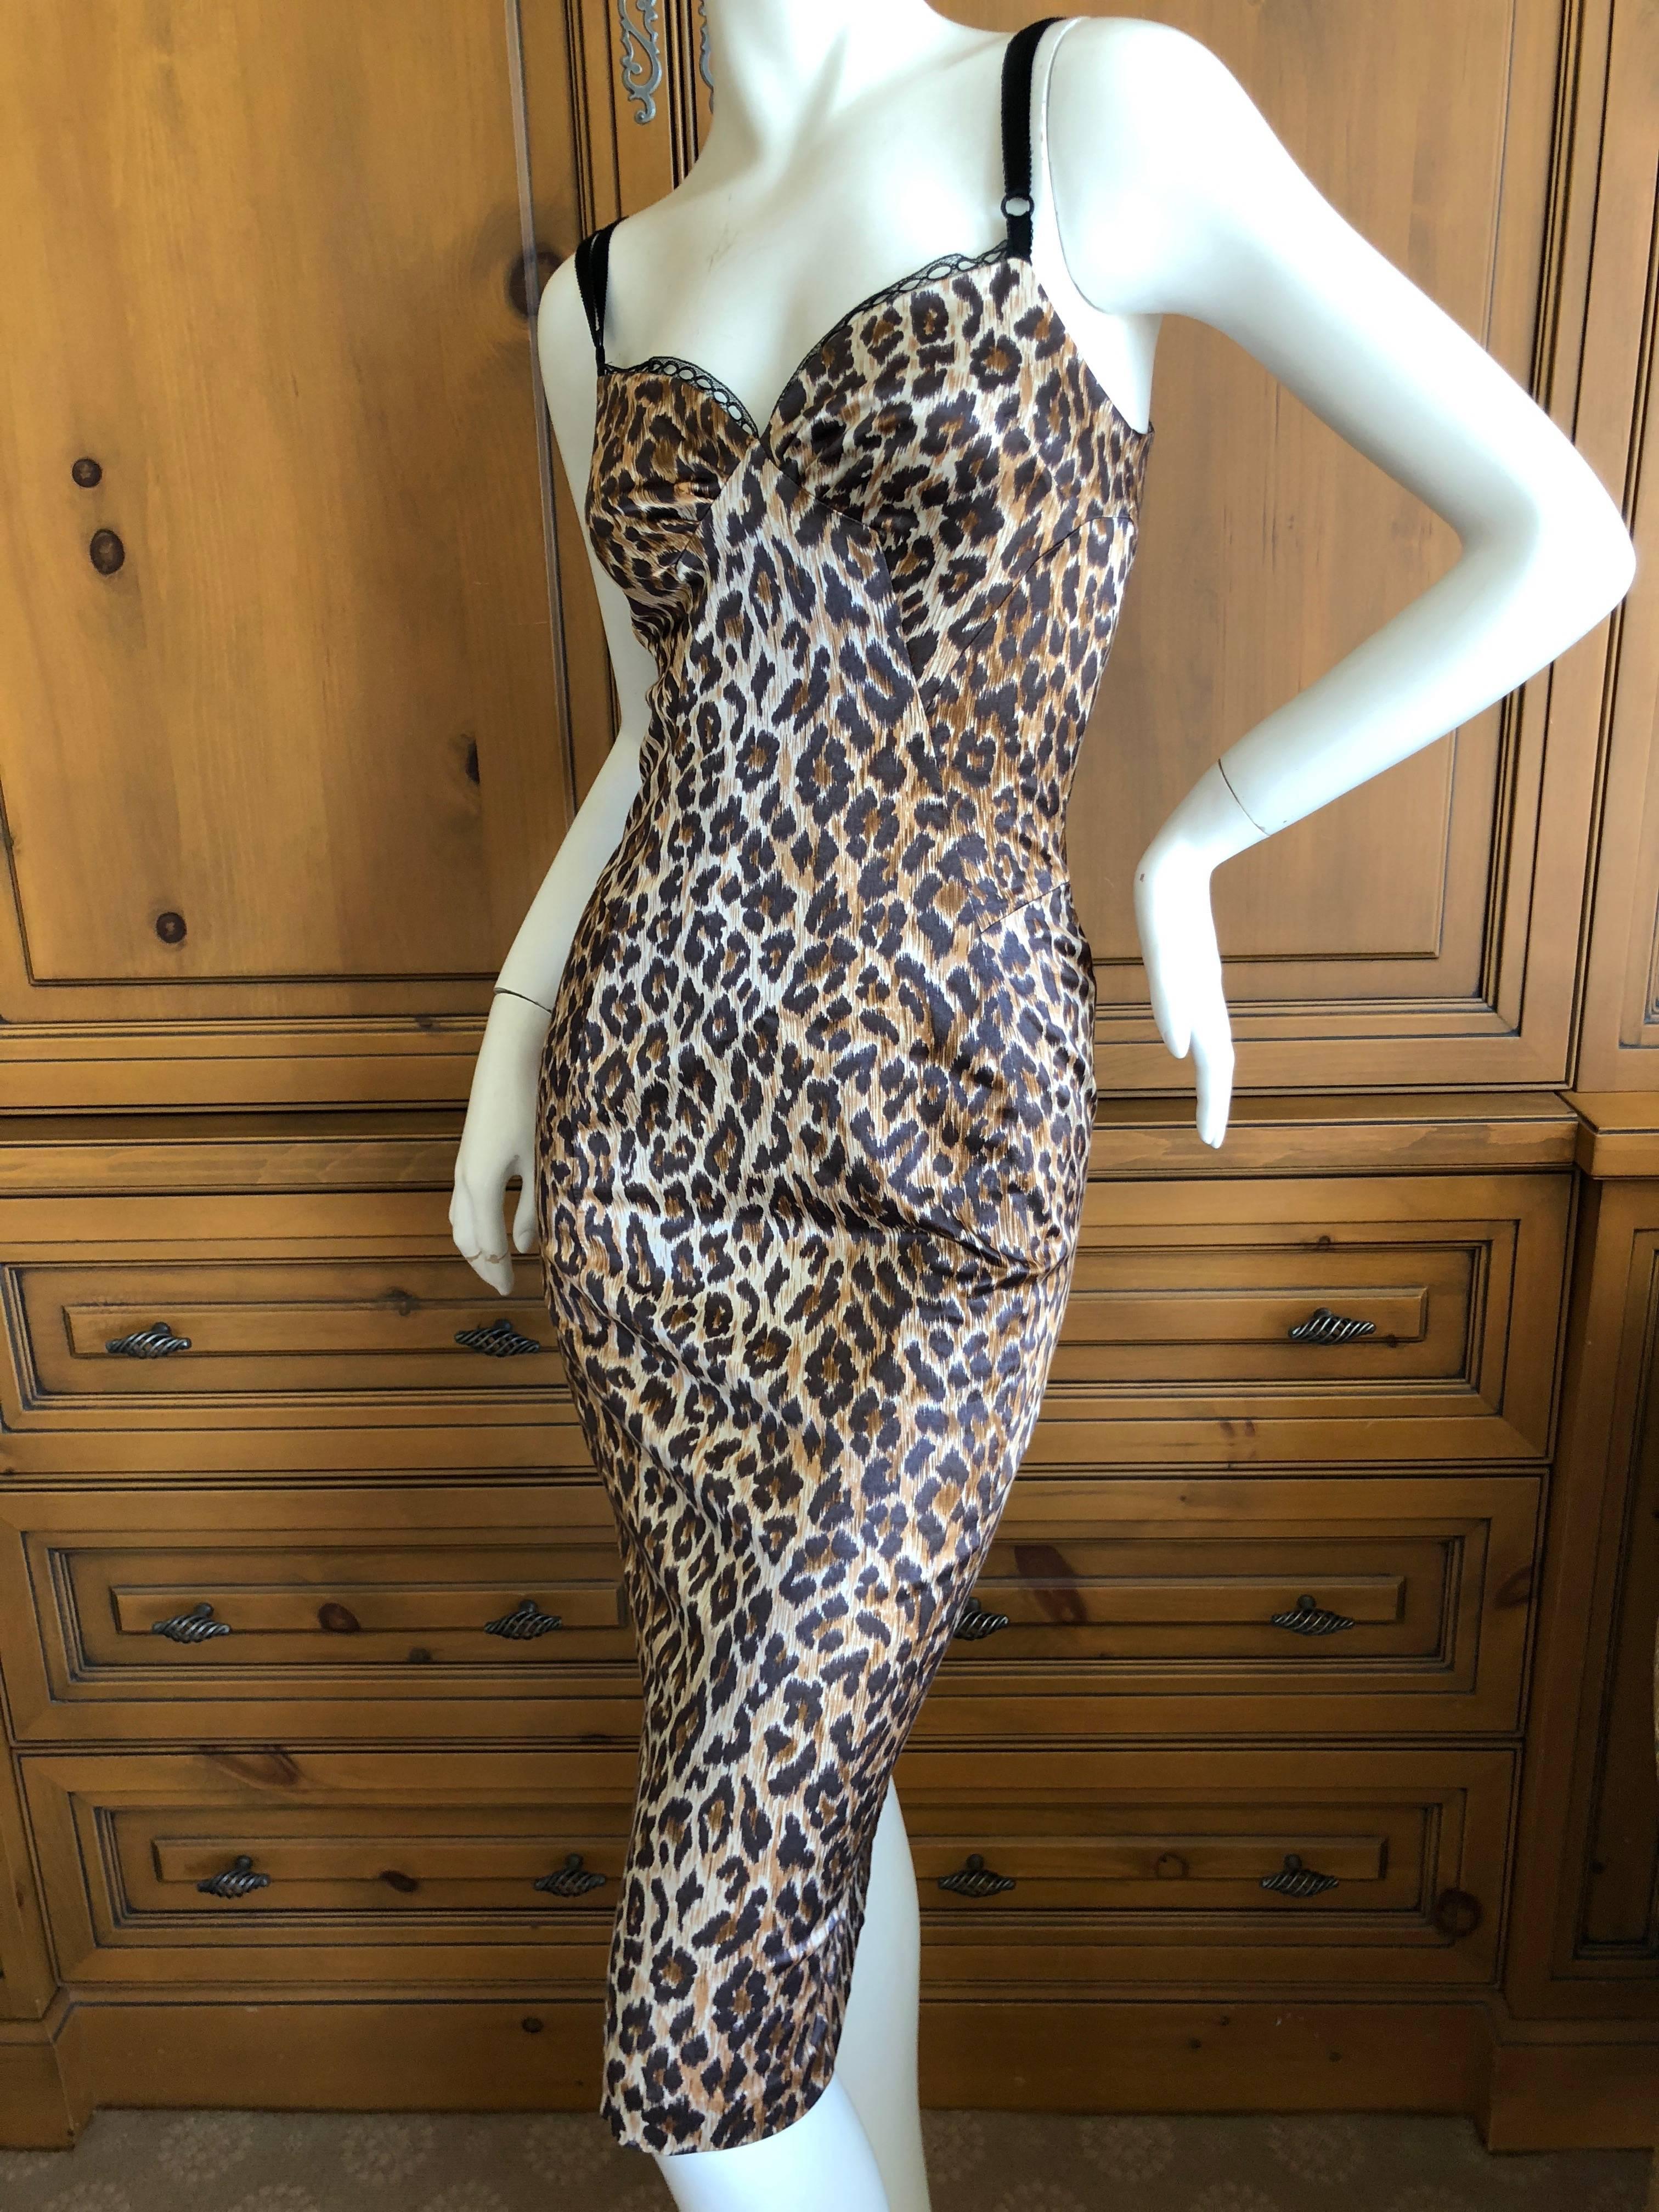 Sexy leopard print cocktail dress from D&G Dolce & Gahanna .
Size 40